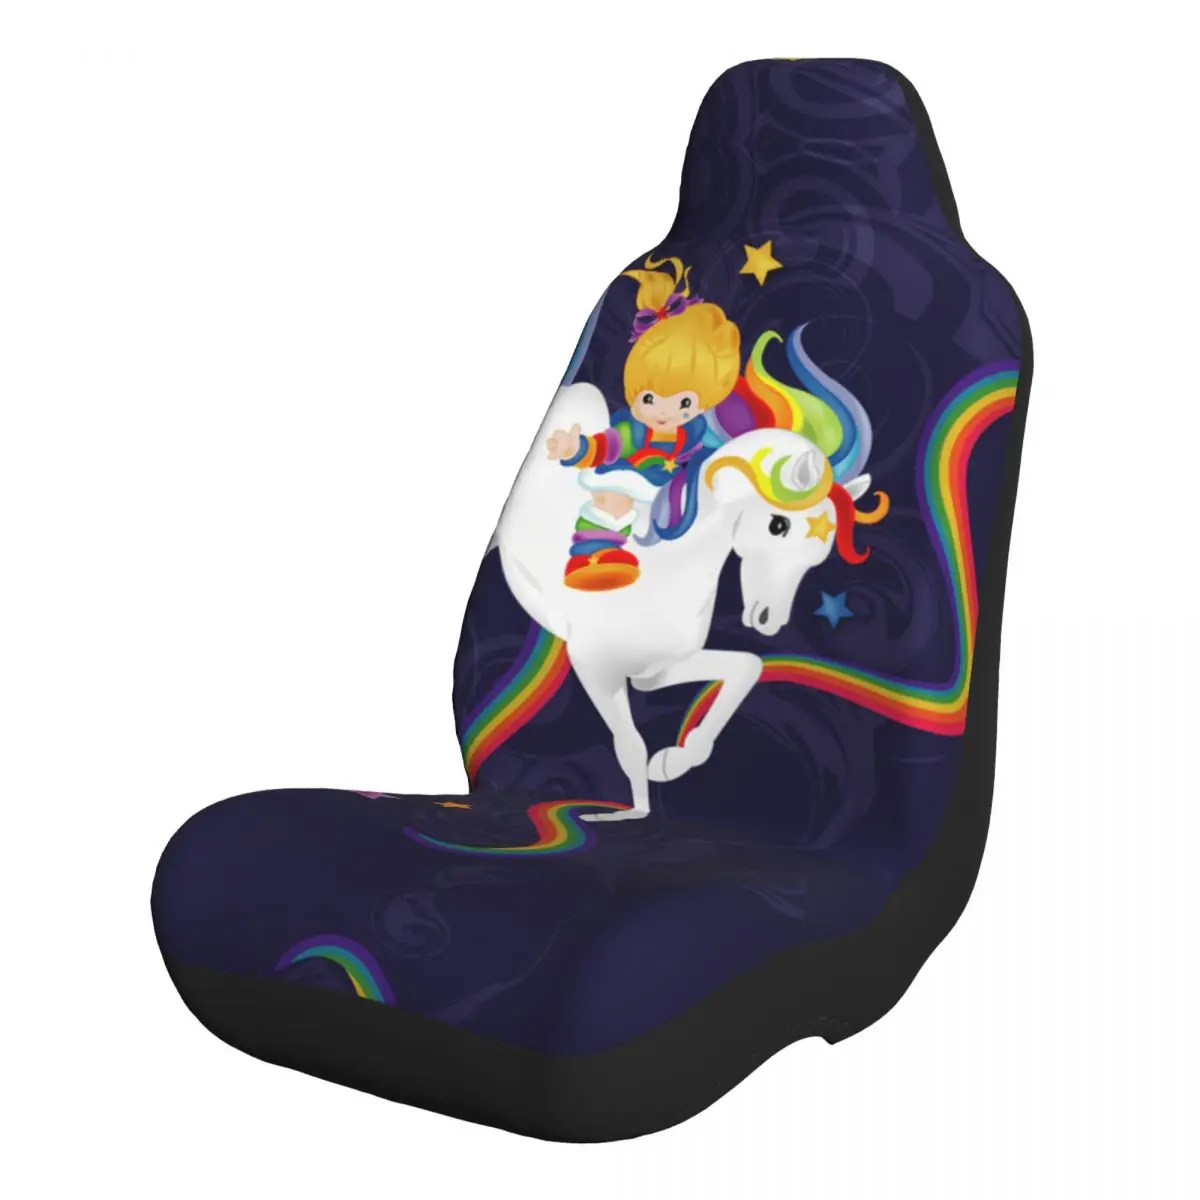 

Rainbow Brite Memories Universal Car Seat Covers Front Seats Protectors Cover for Truck Van SUV Seat Protecto Accessories